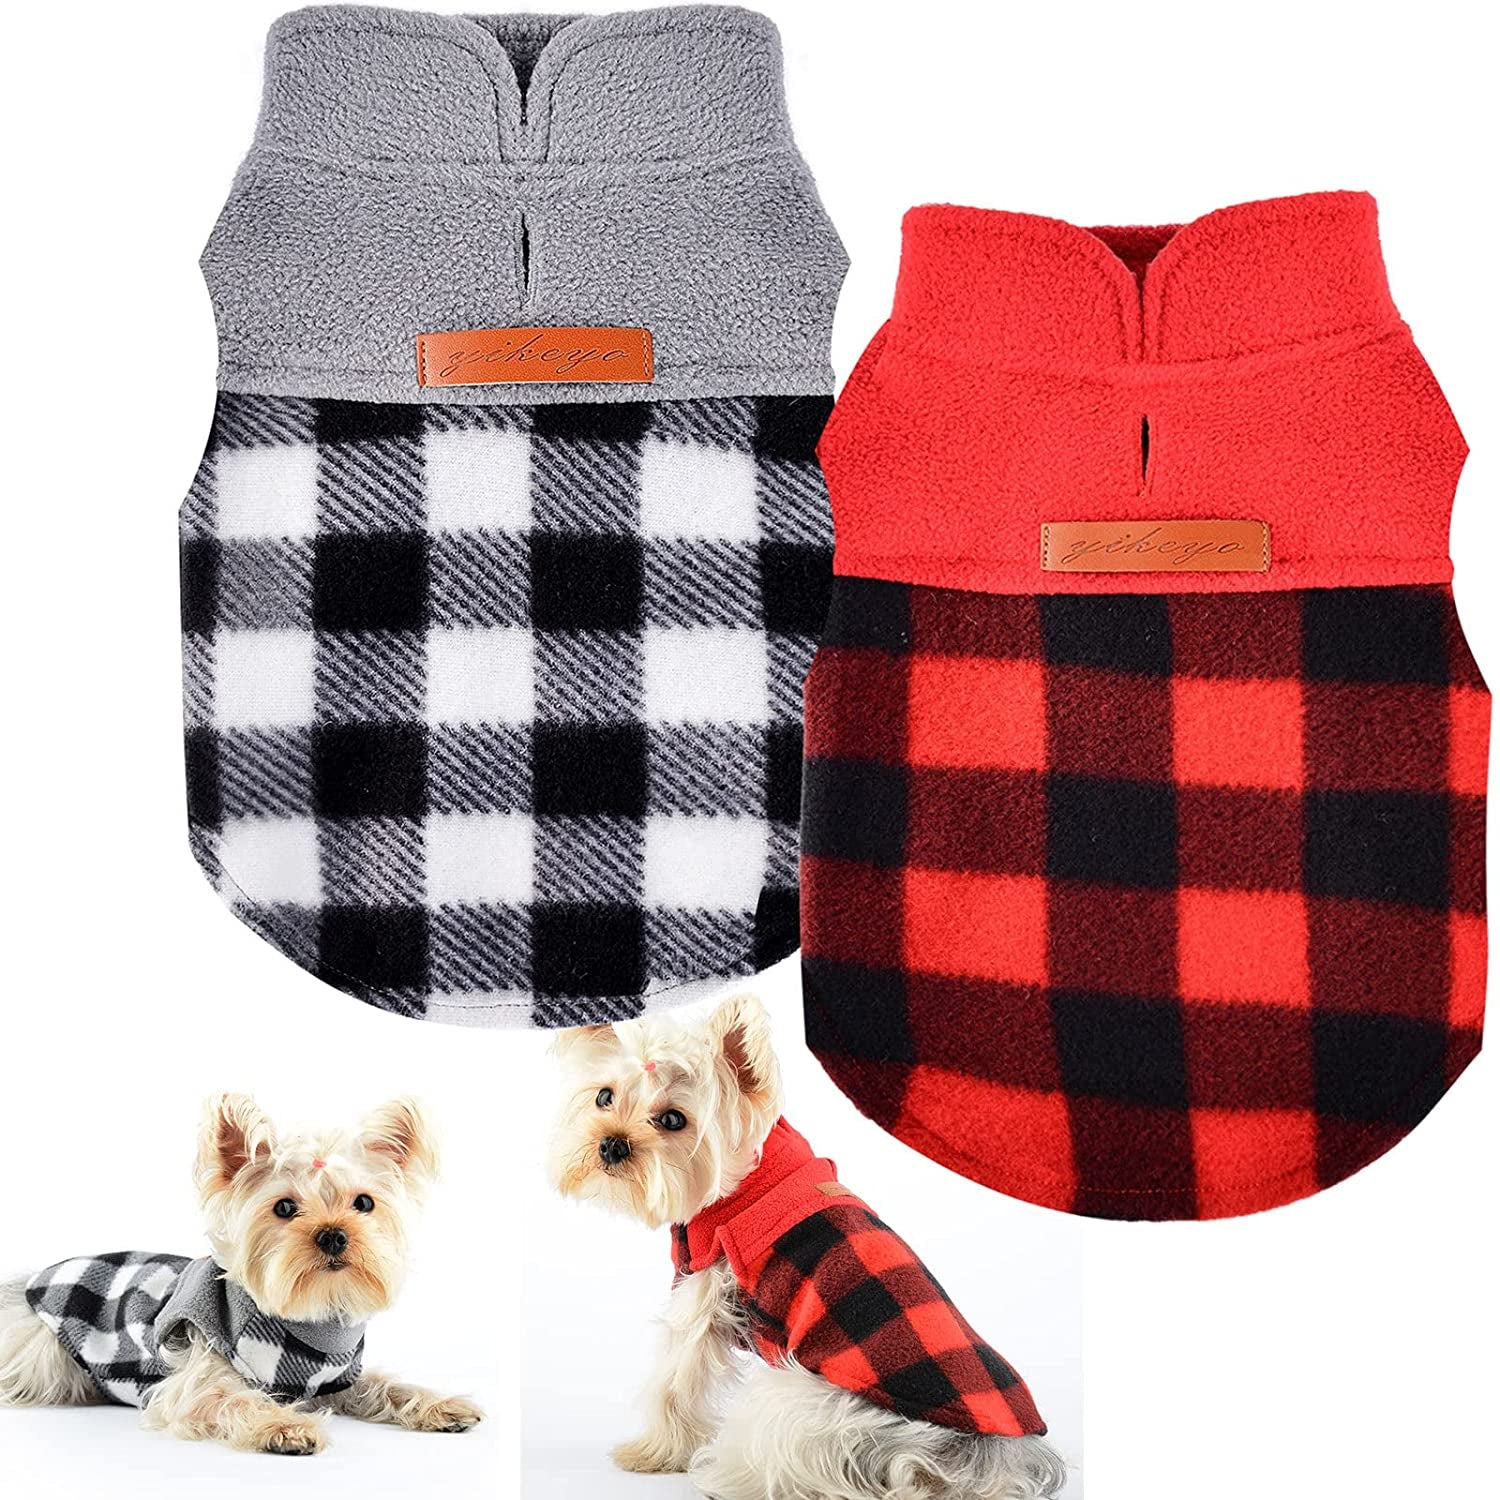  Dog Sweater Coat, Dog Pajamas PJS, Dog Clothes, Dog Christmas  Sweaters for Small Medium Dogs Boy Girl Cat Apparel Doggie Jacket Onesie  Soft Warm Holiday Outfits (X-Small, Lavender) : Pet